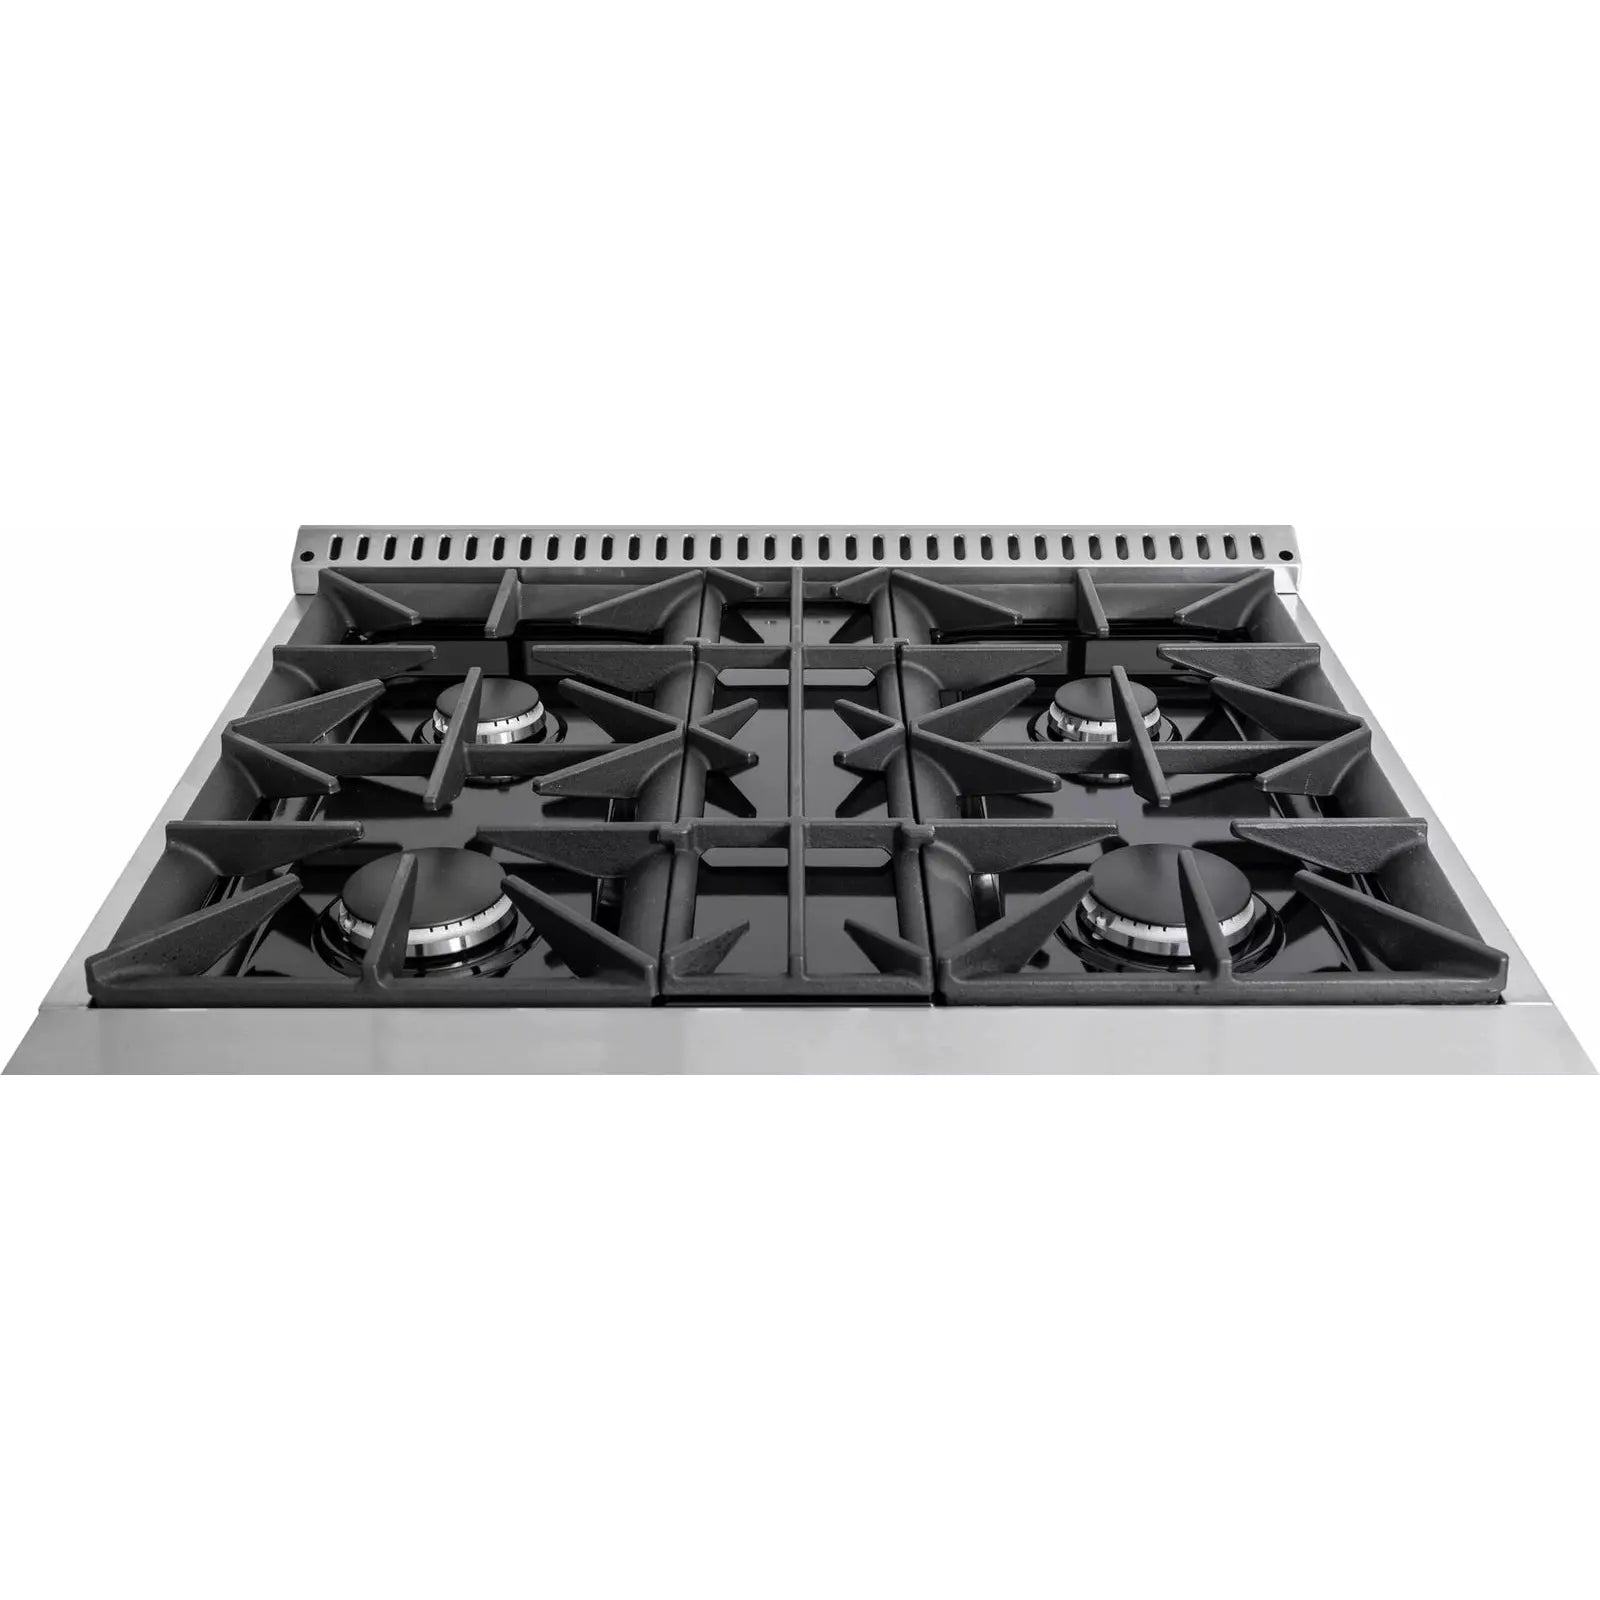 Forte 30" Freestanding All Gas Range - 4 Sealed Italian Made Burners, 3.53 cu. ft. Oven, Easy Glide Oven Racks - in Stainless Steel With White Door And Stainless Steel Knob (FGR304BWW1)